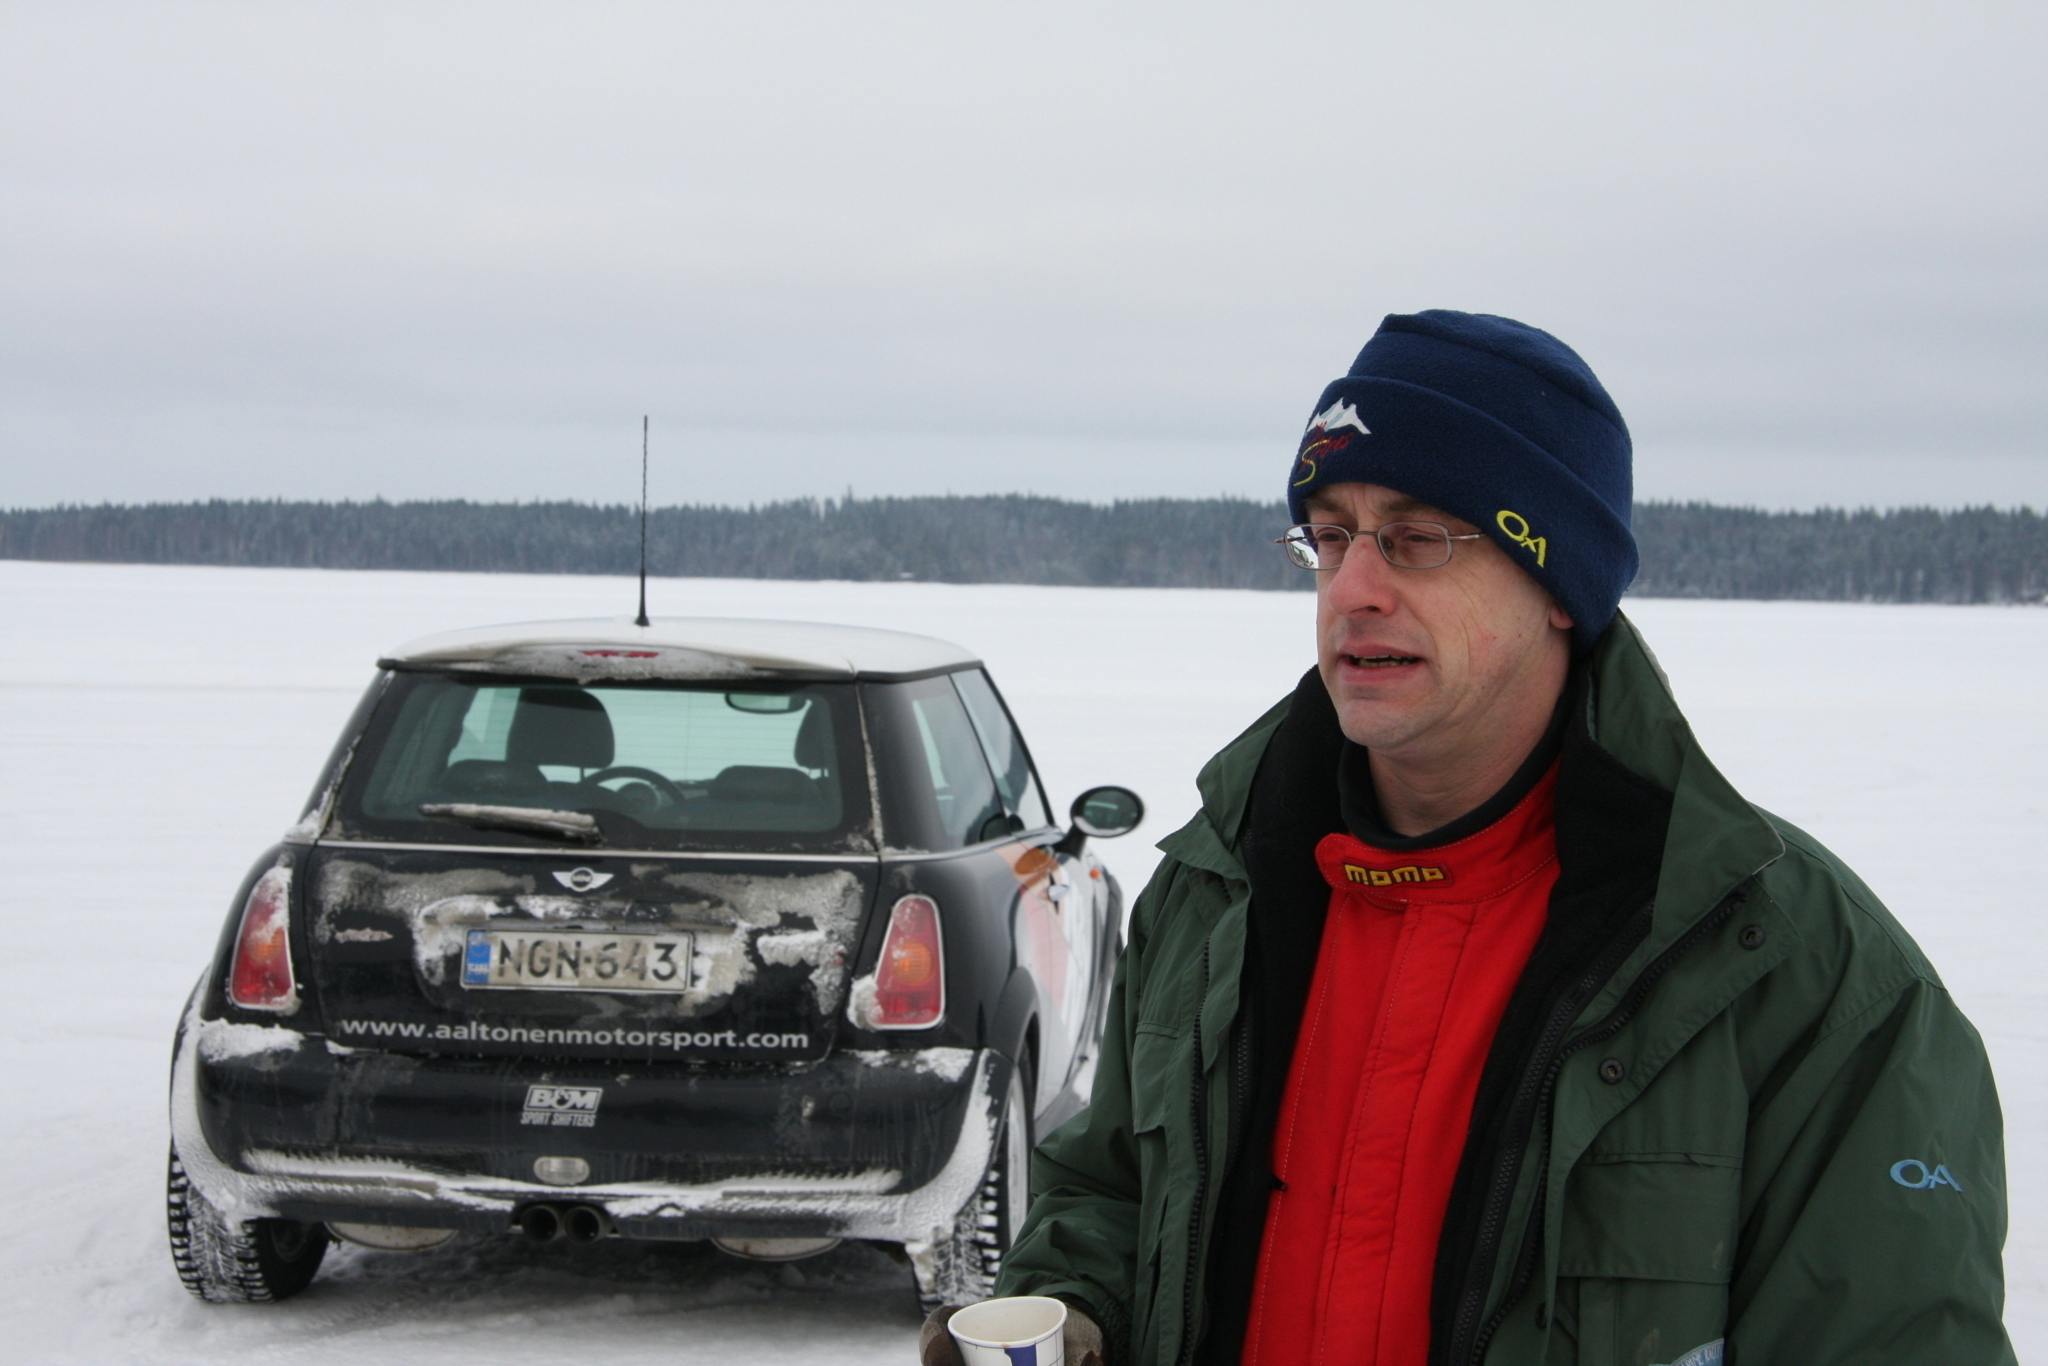 Peter Barker learning to drive MIN Is on ice in Finland 2008